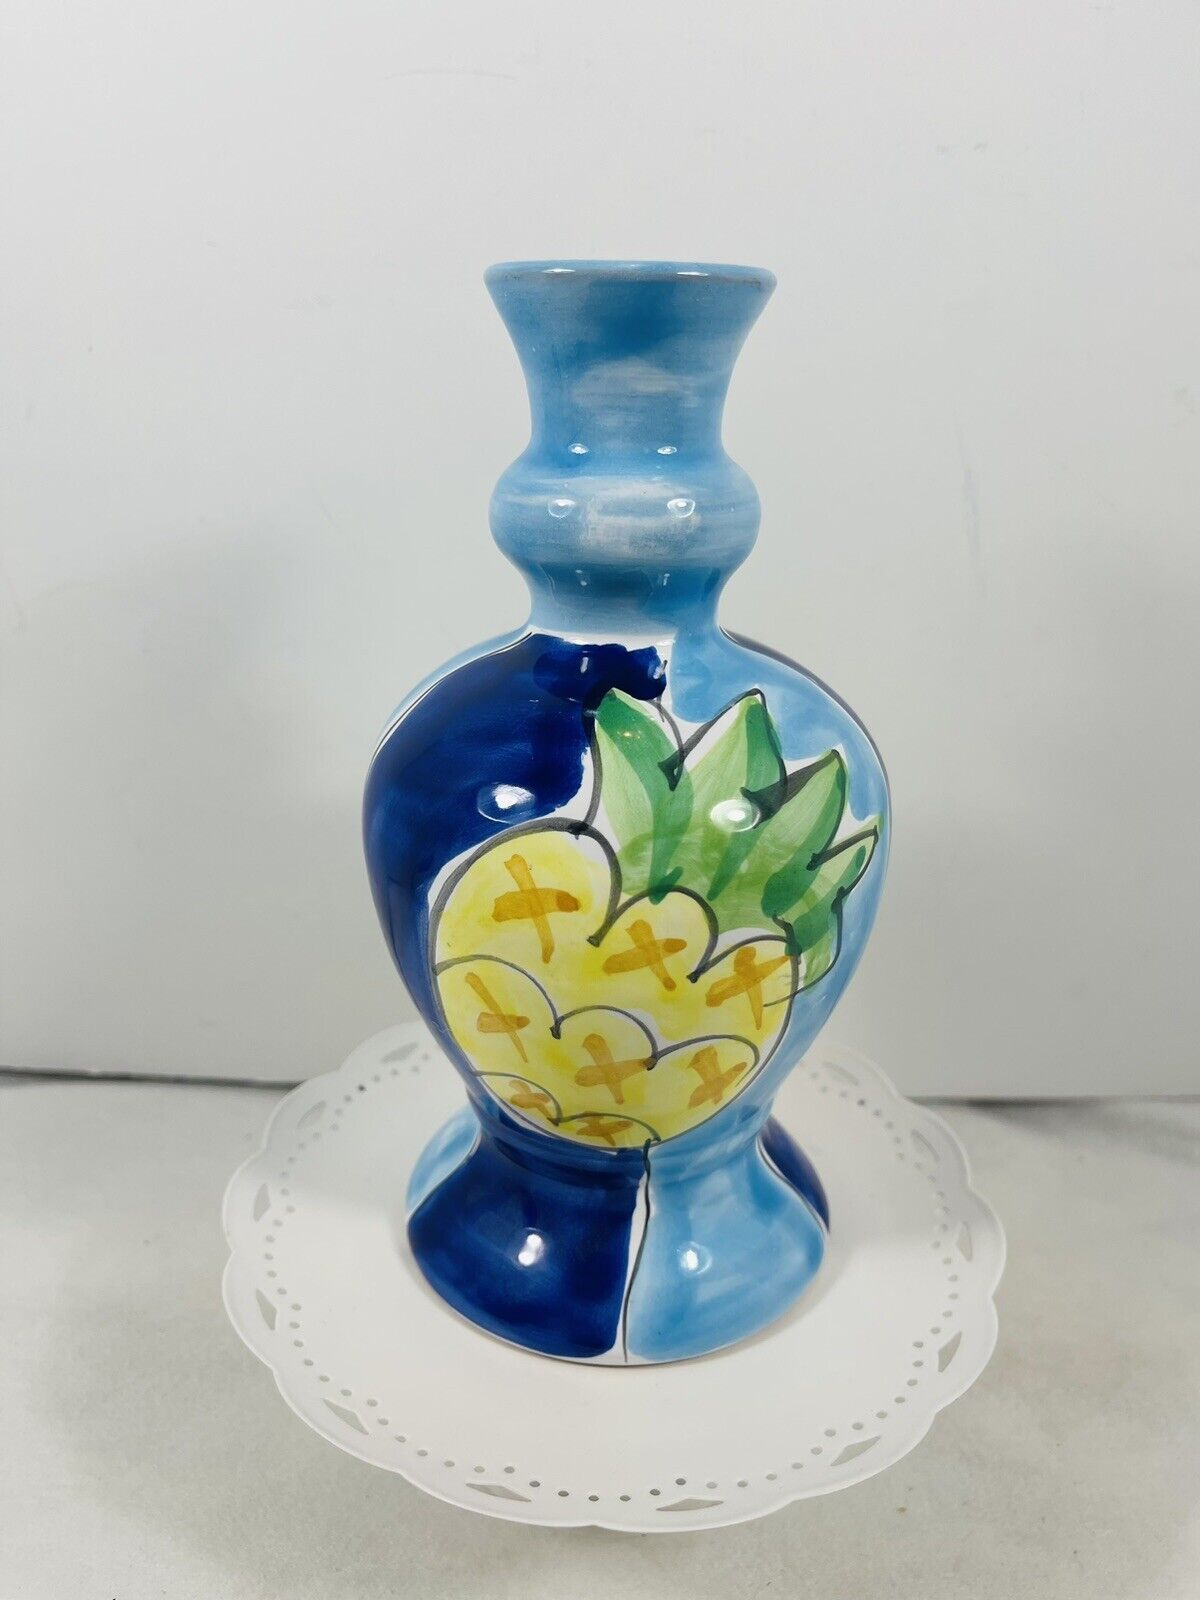 La Musa Candlesticks Holder - Ceramic Blue Palm Tree - Set of 2 Made in Italy